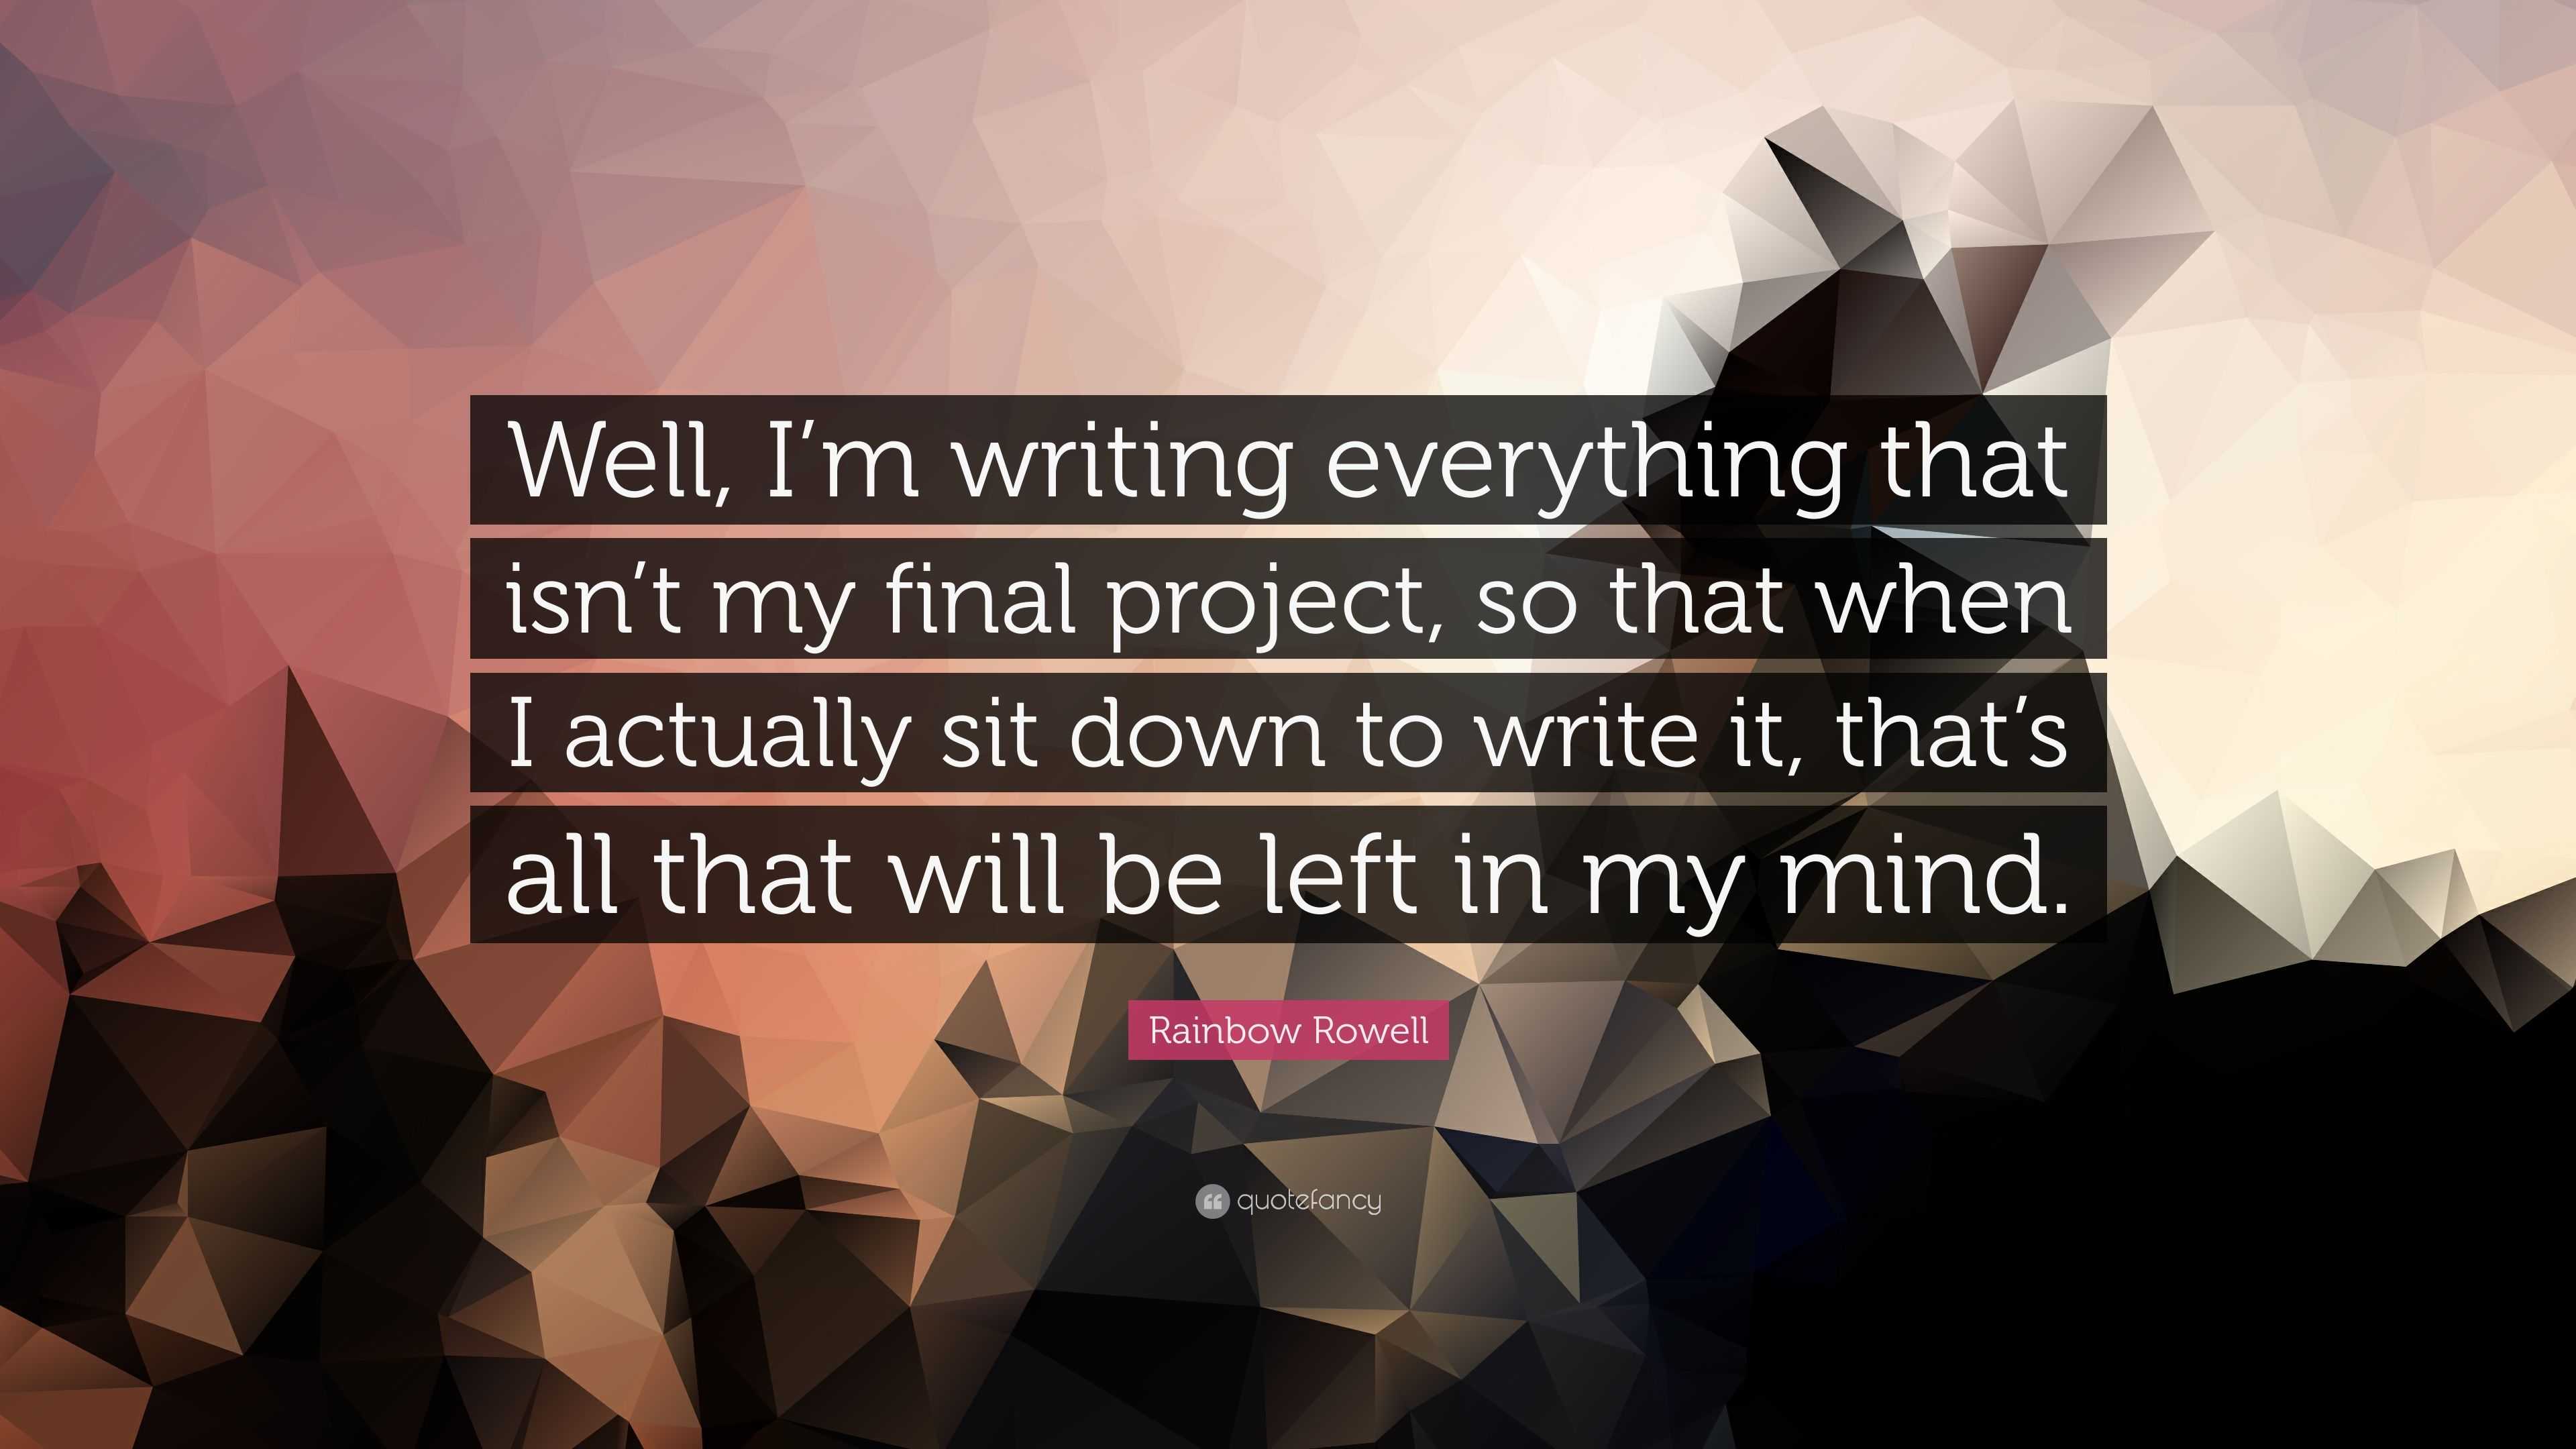 8 Rainbow Rowell Quotes for Writers and About Writing - Writer's Digest